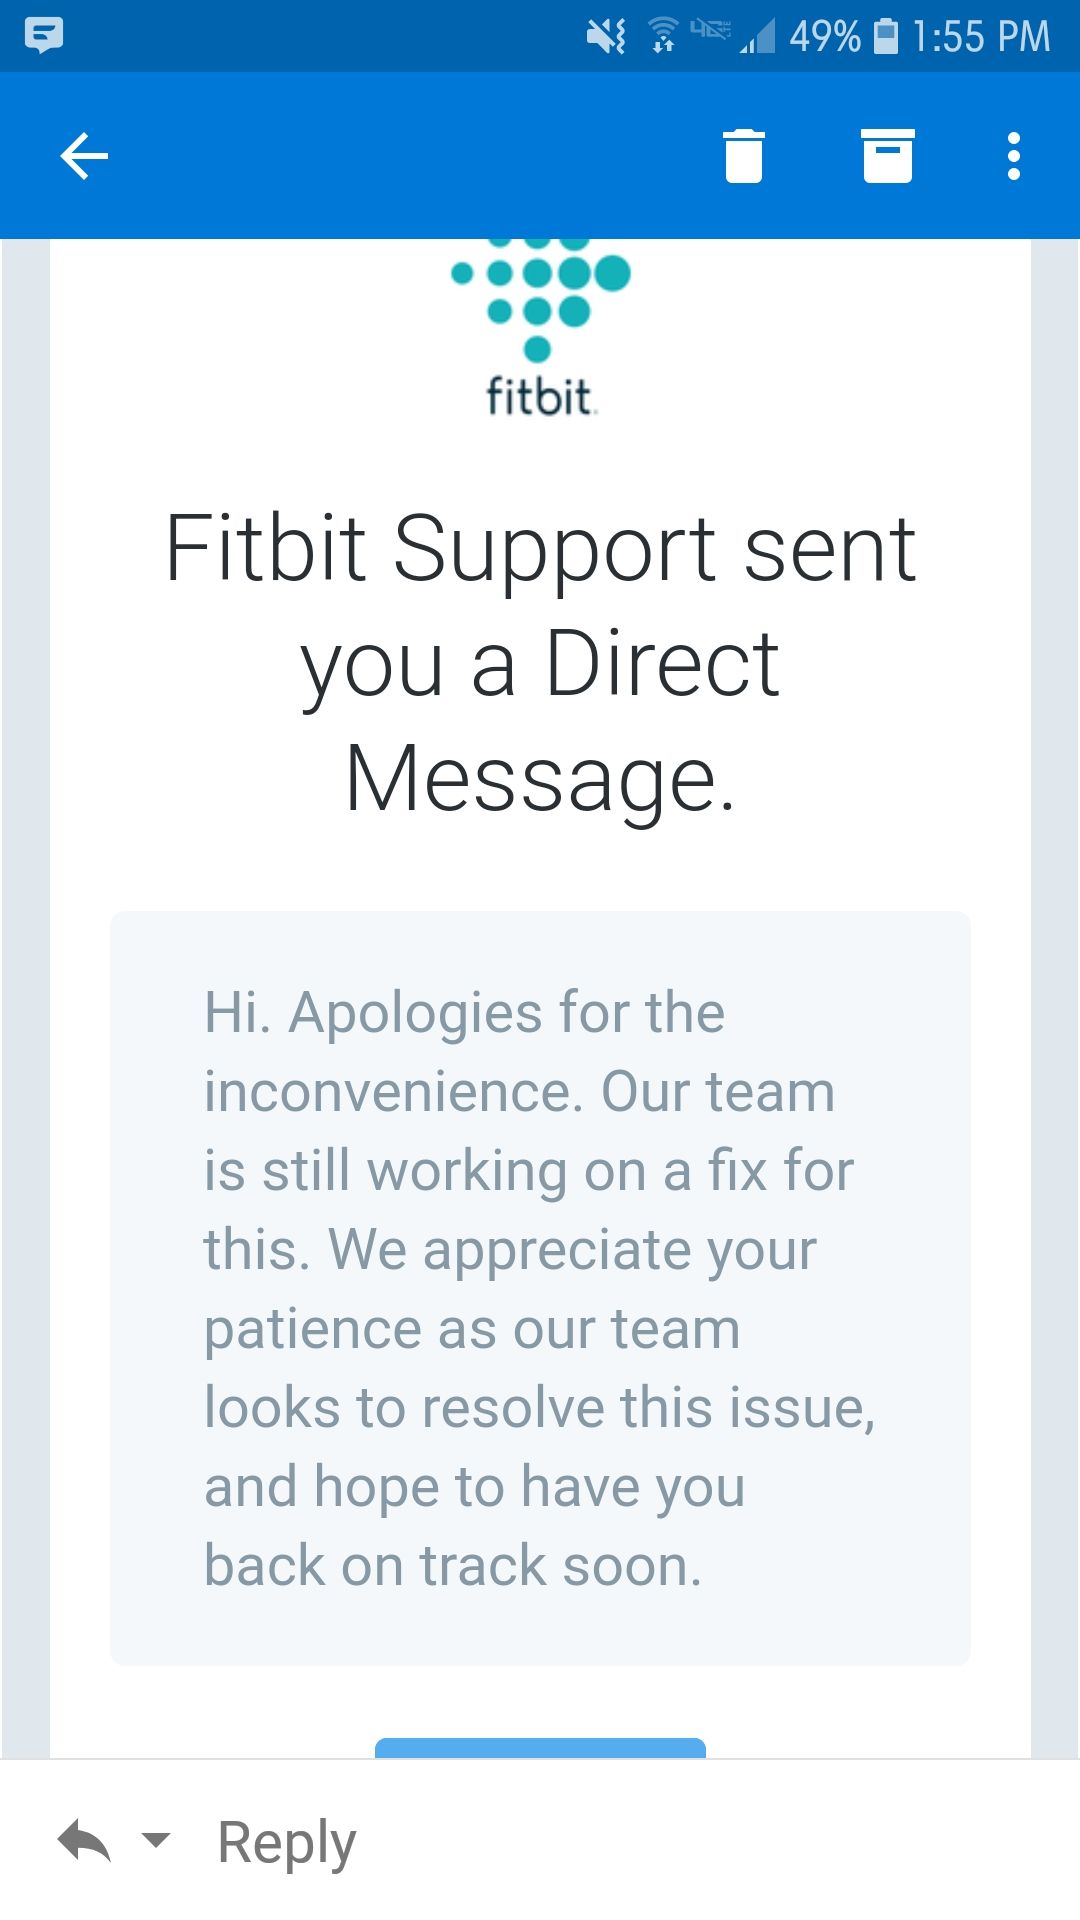 Inspire HR: Step accuracy - Fitbit 